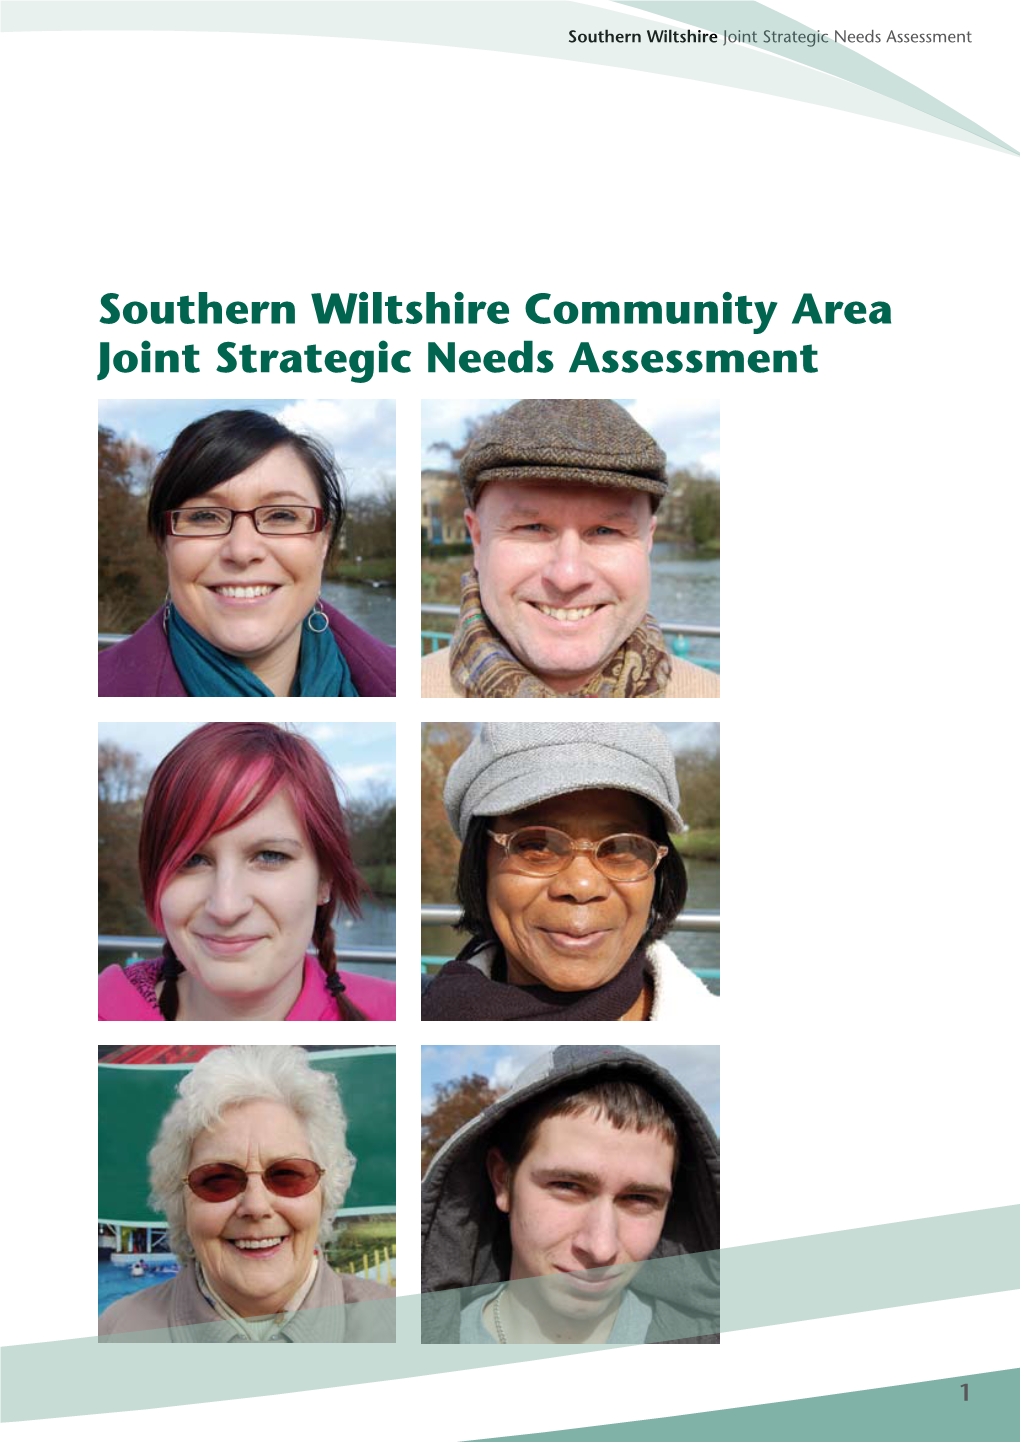 Southern Wiltshire Community Area Joint Strategic Needs Assessment